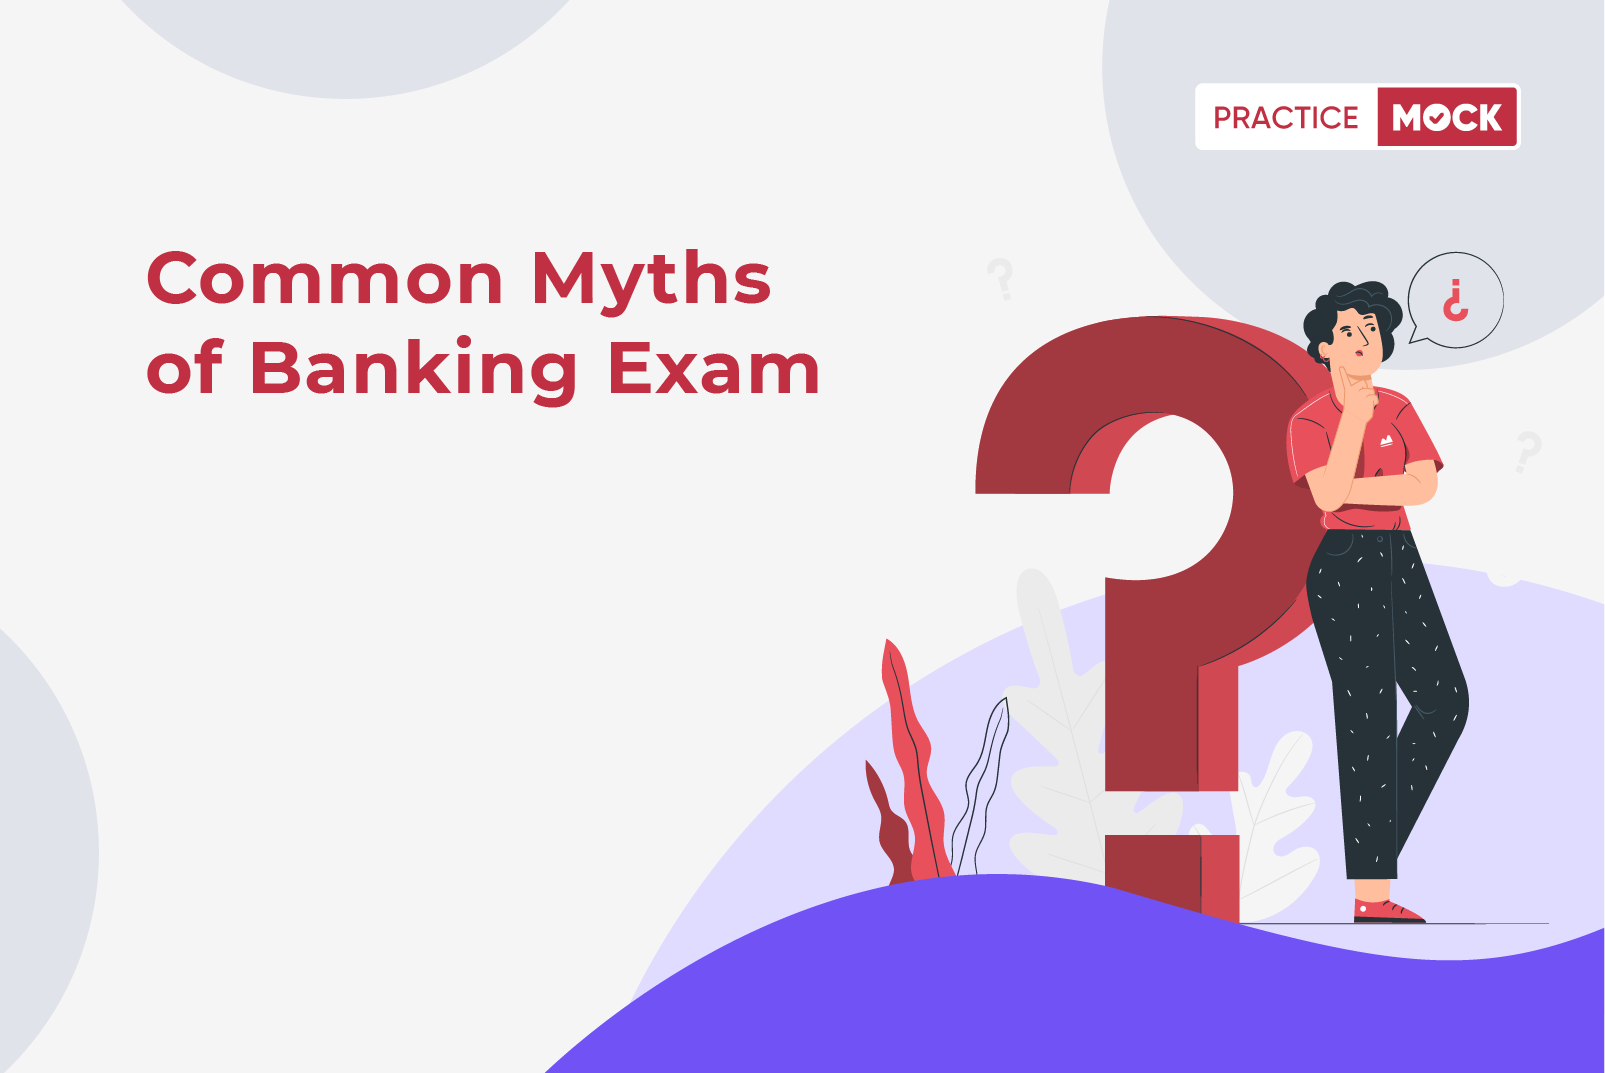 Common myths about Banking Exams